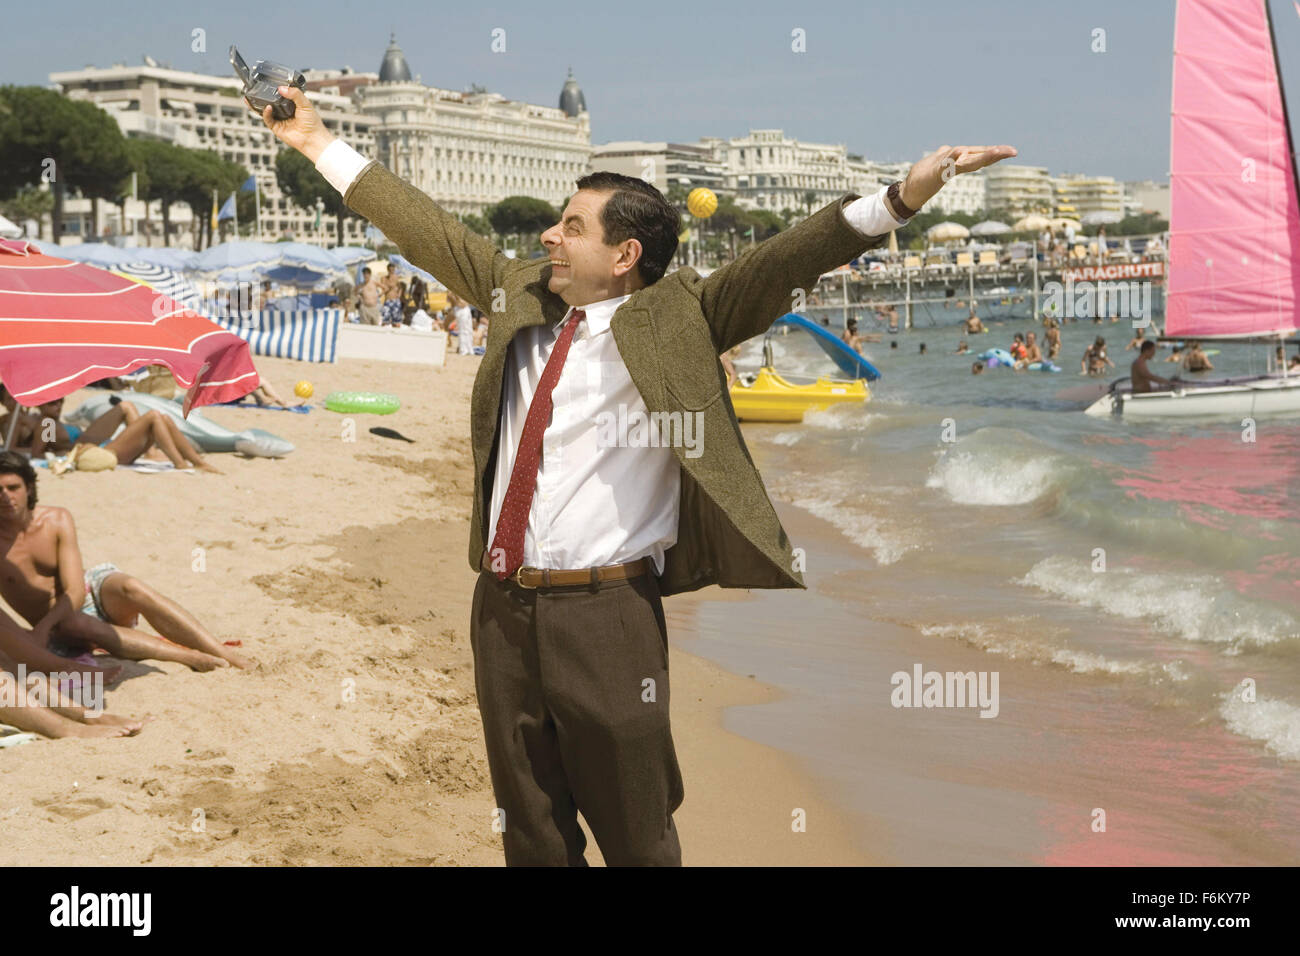 RELEASE DATE: September, 2007. MOVIE TITLE: Mr. Bean's Holiday. STUDIO: Universal Pictures. PLOT: Mr. Bean returns but not for long as he goes on his travels to the south of France where mishap and mayhem begin, by the end Bean even has his video diaries at the Cannes Film Festival. PICTURED: ROWAN ATKINSON as Mr. Bean. Stock Photo